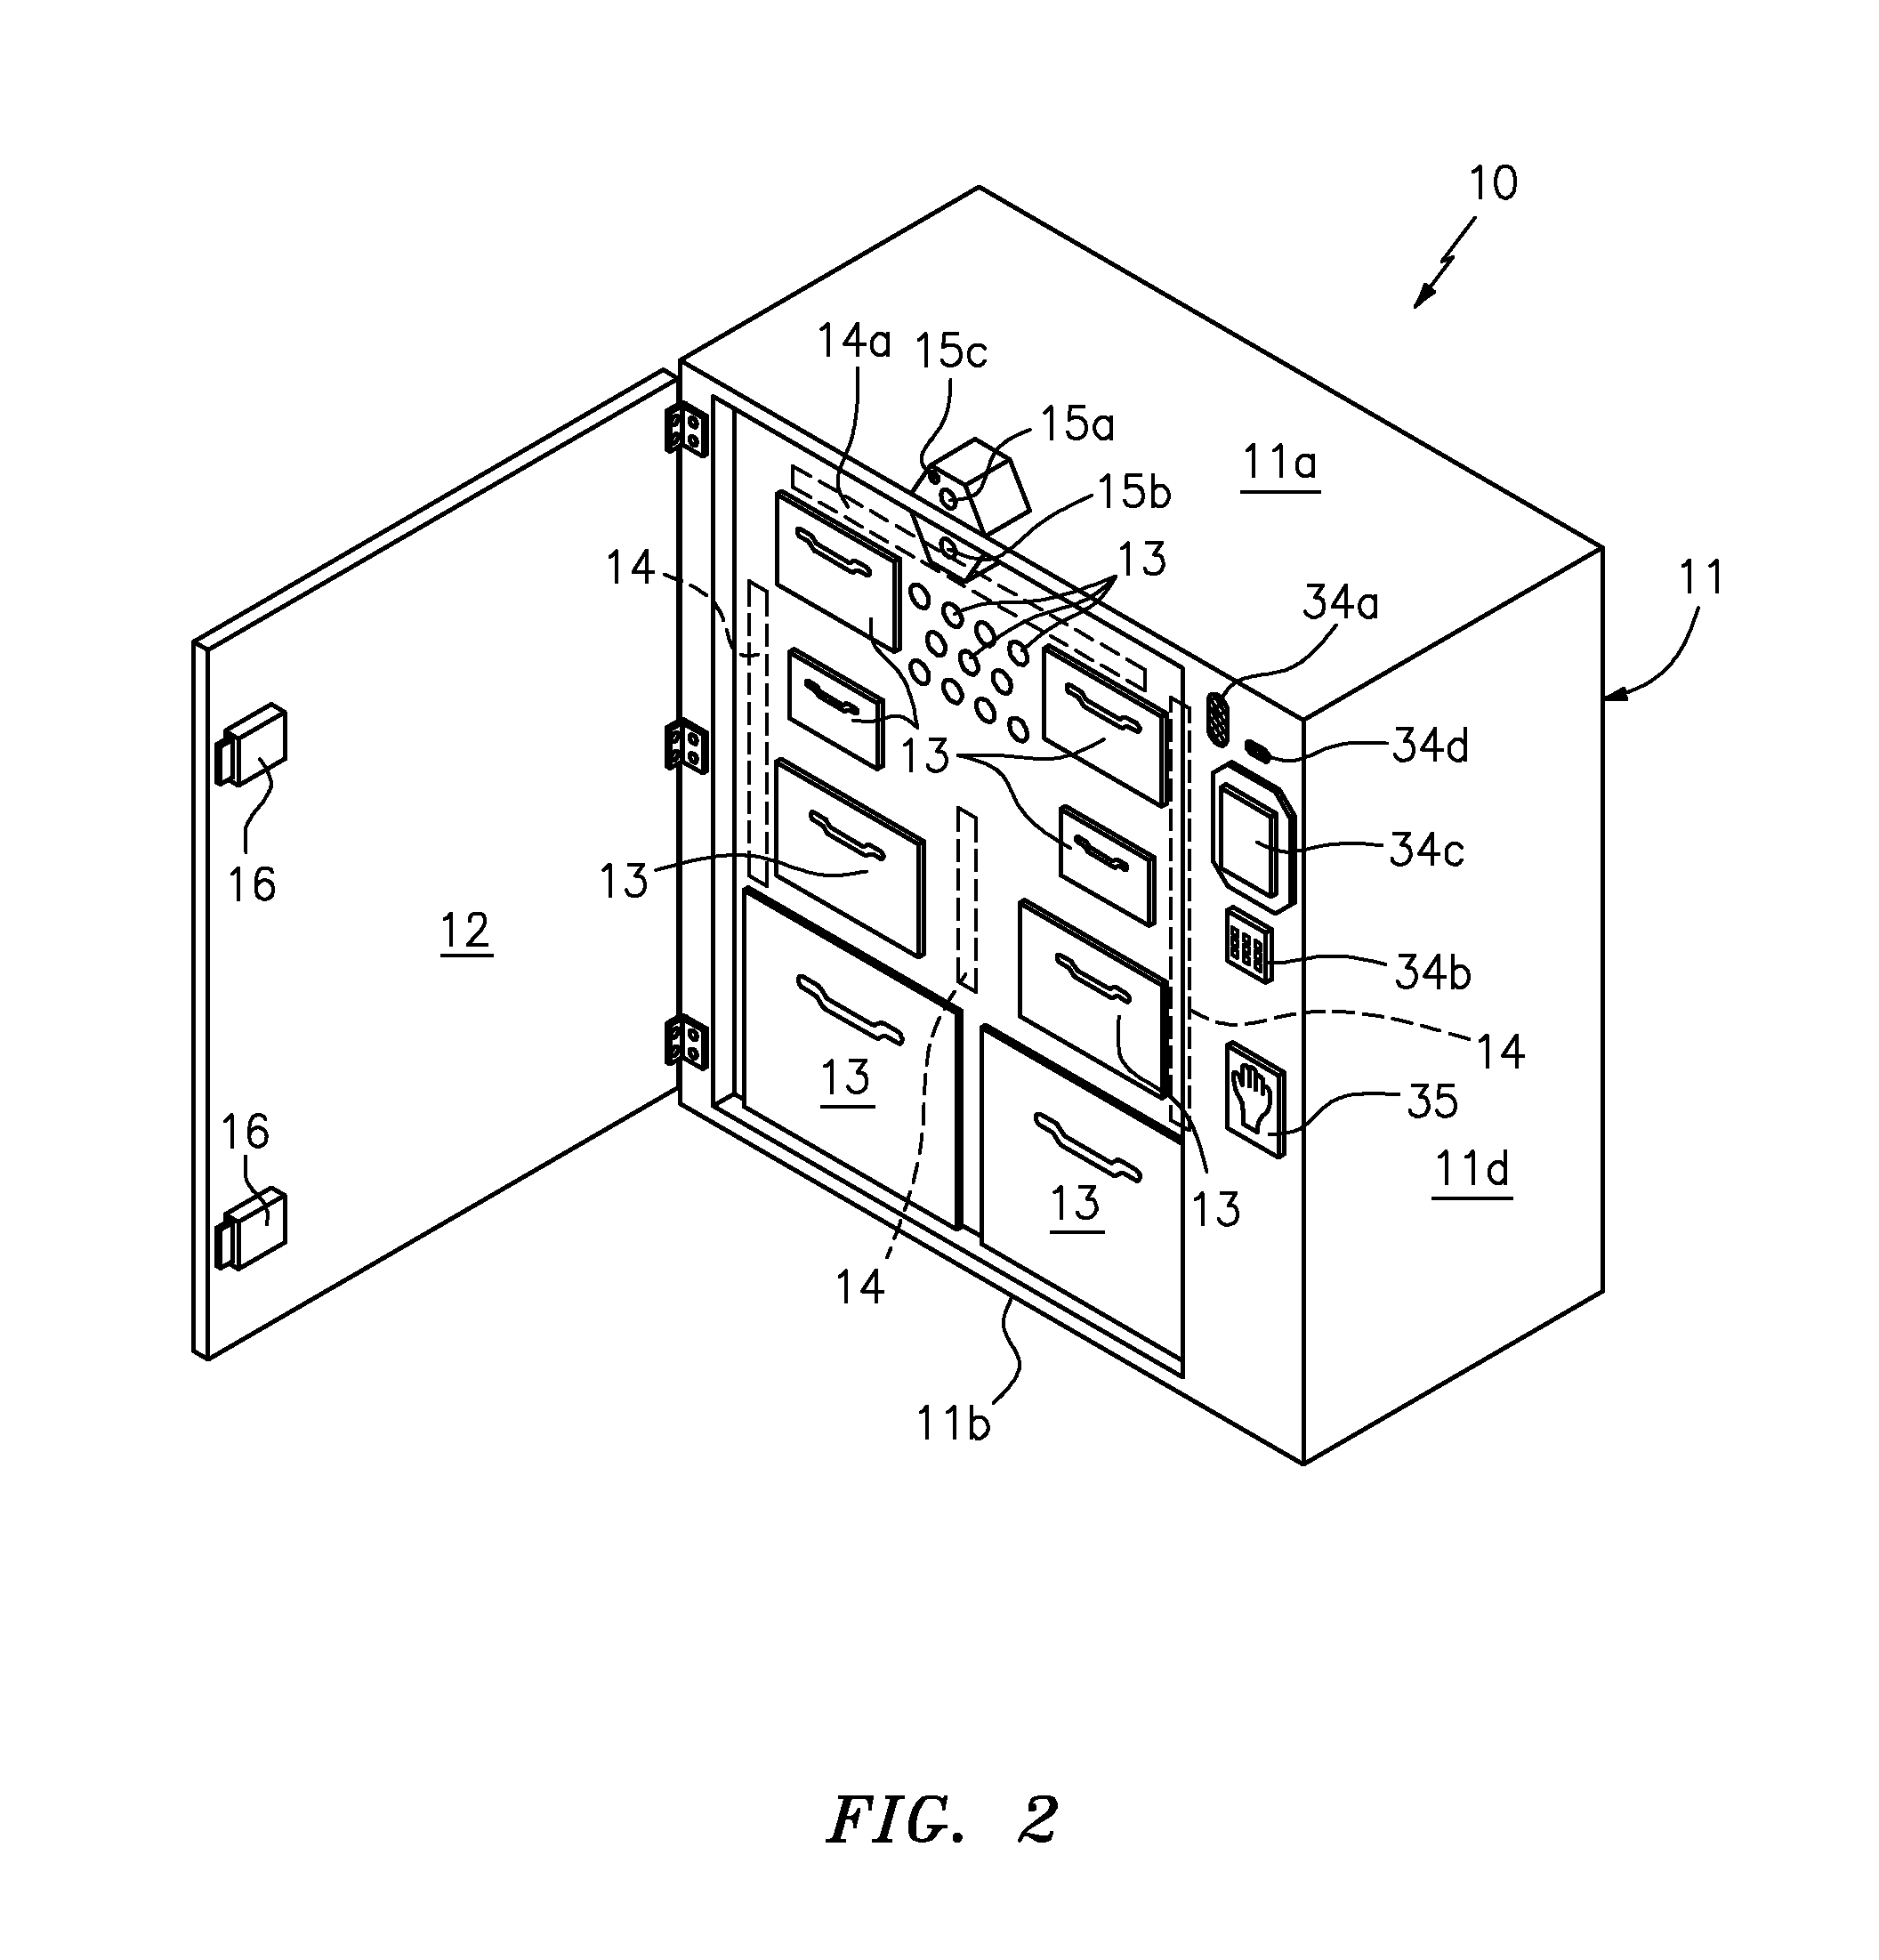 Access controlled medication storage and inventory control apparatus